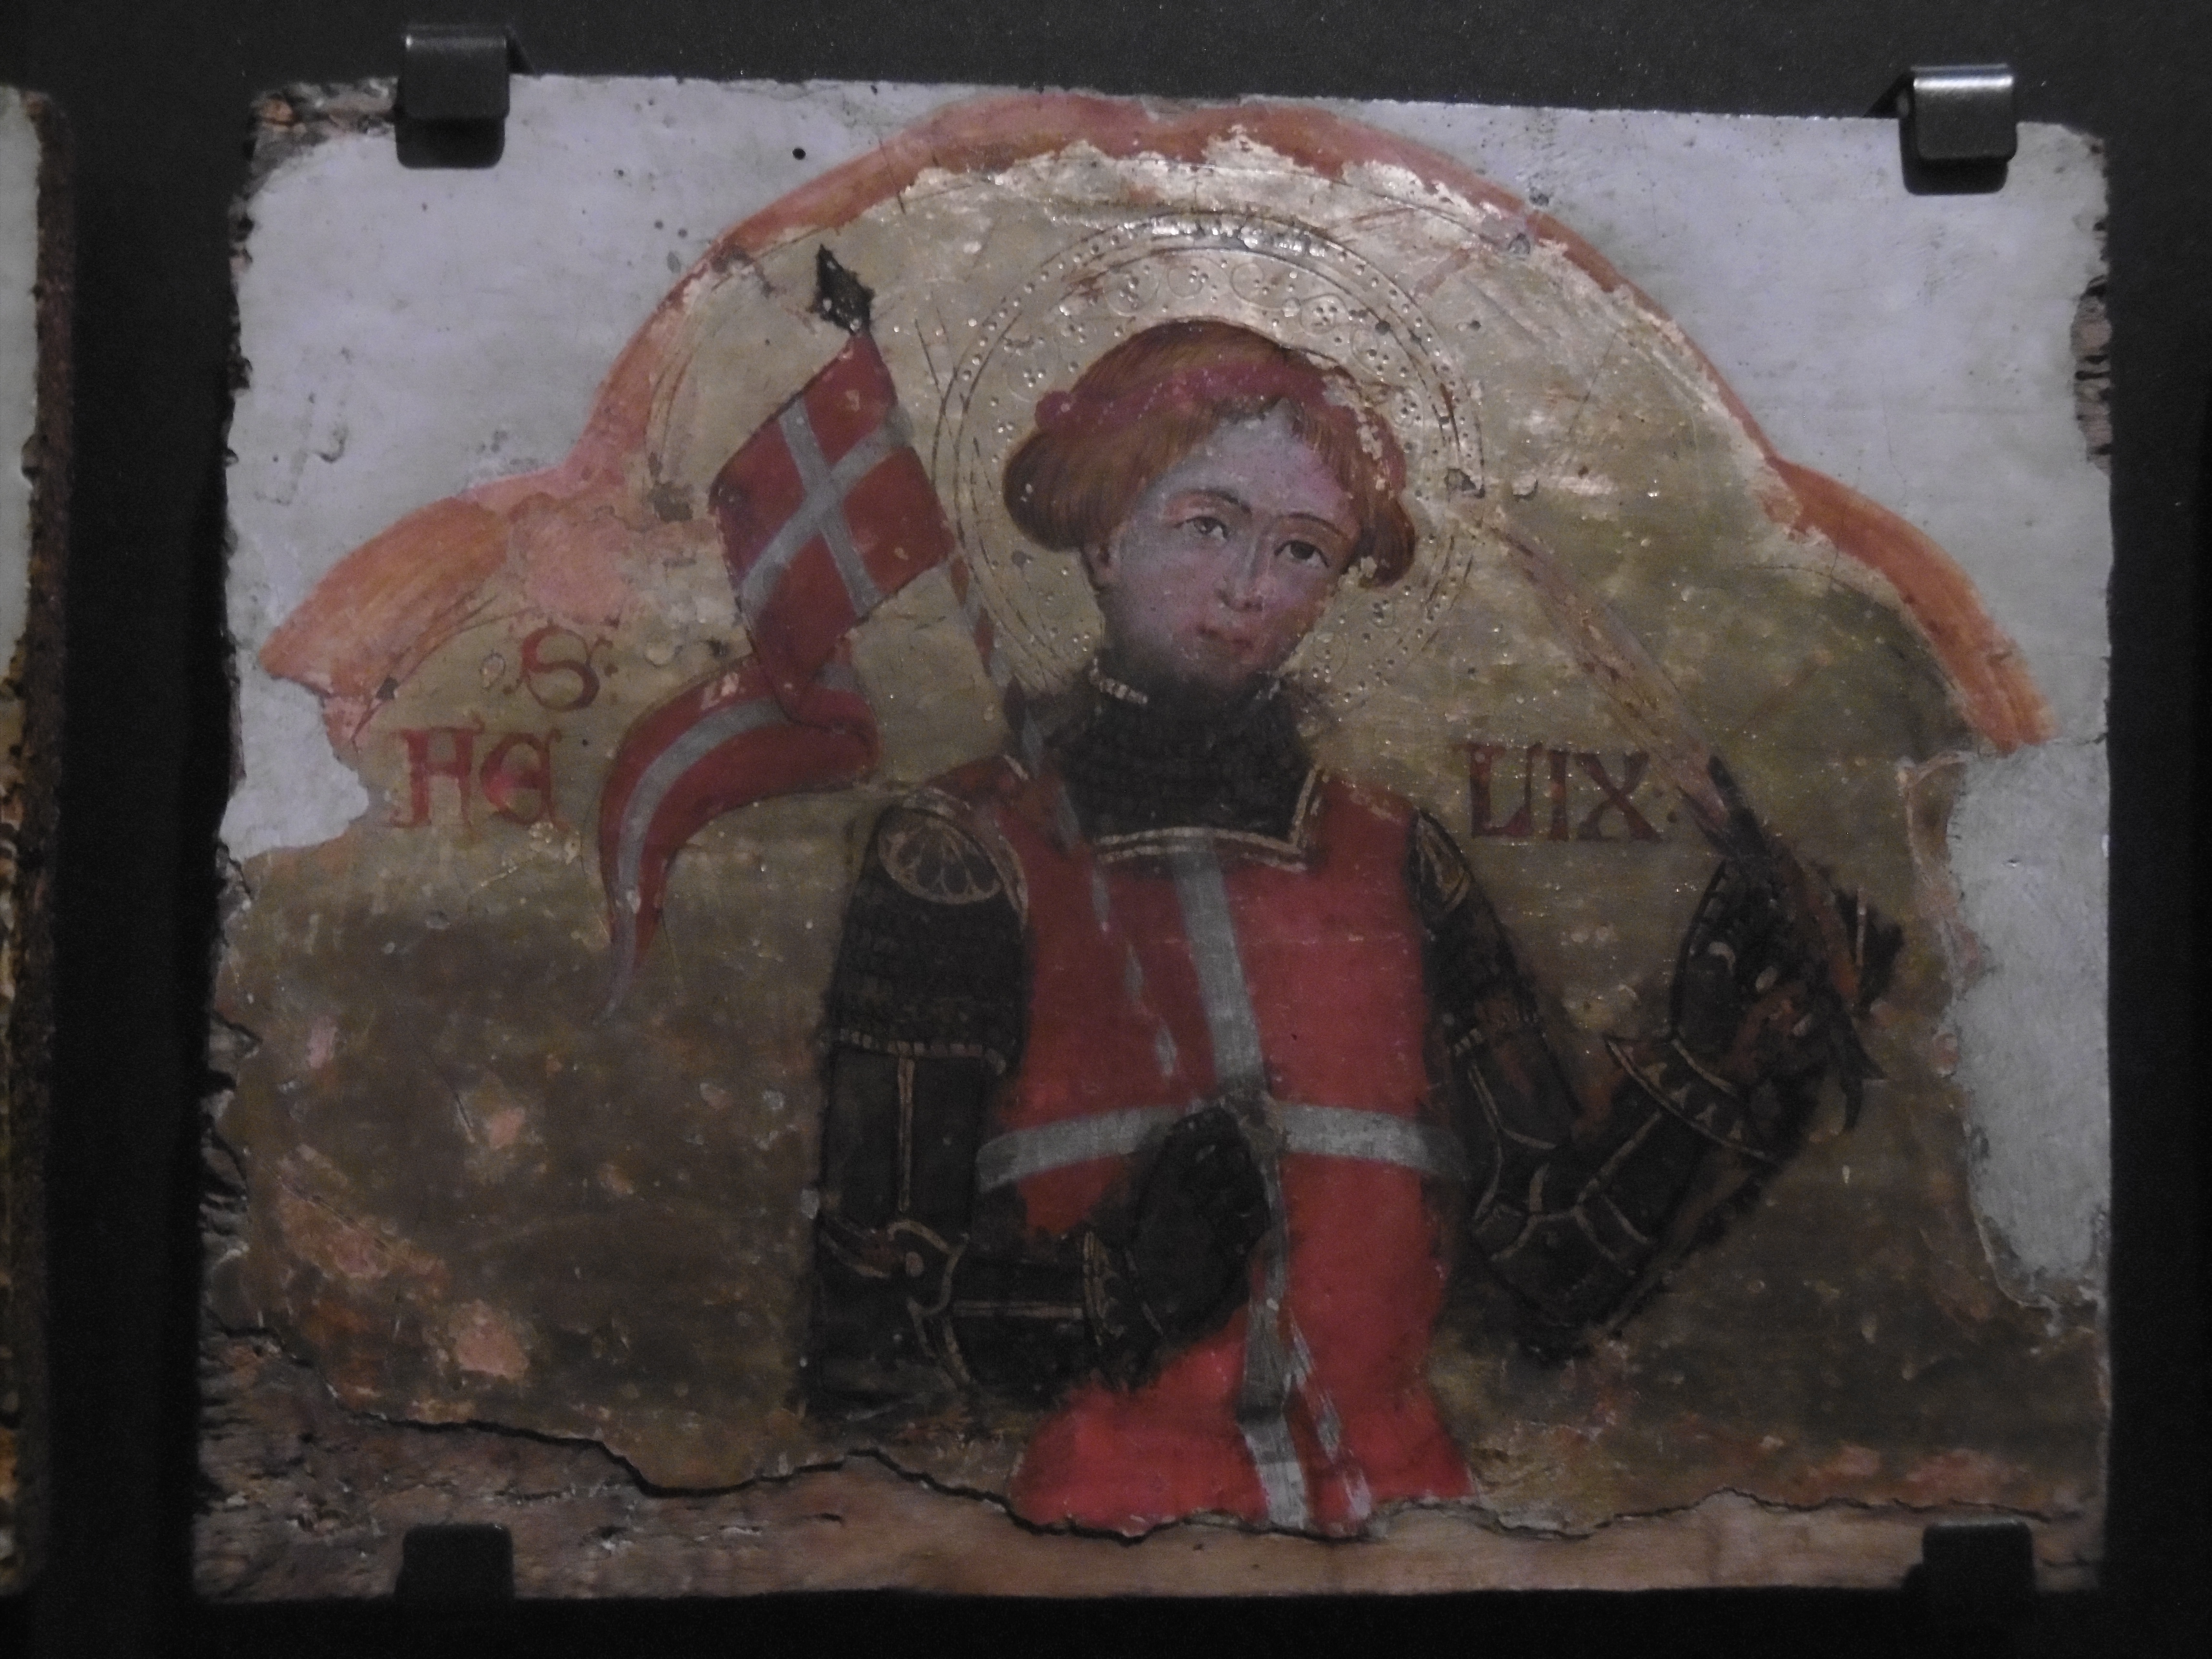 St. Felix in the armour of roughly 1400 with a red surcoat with a white cross on it